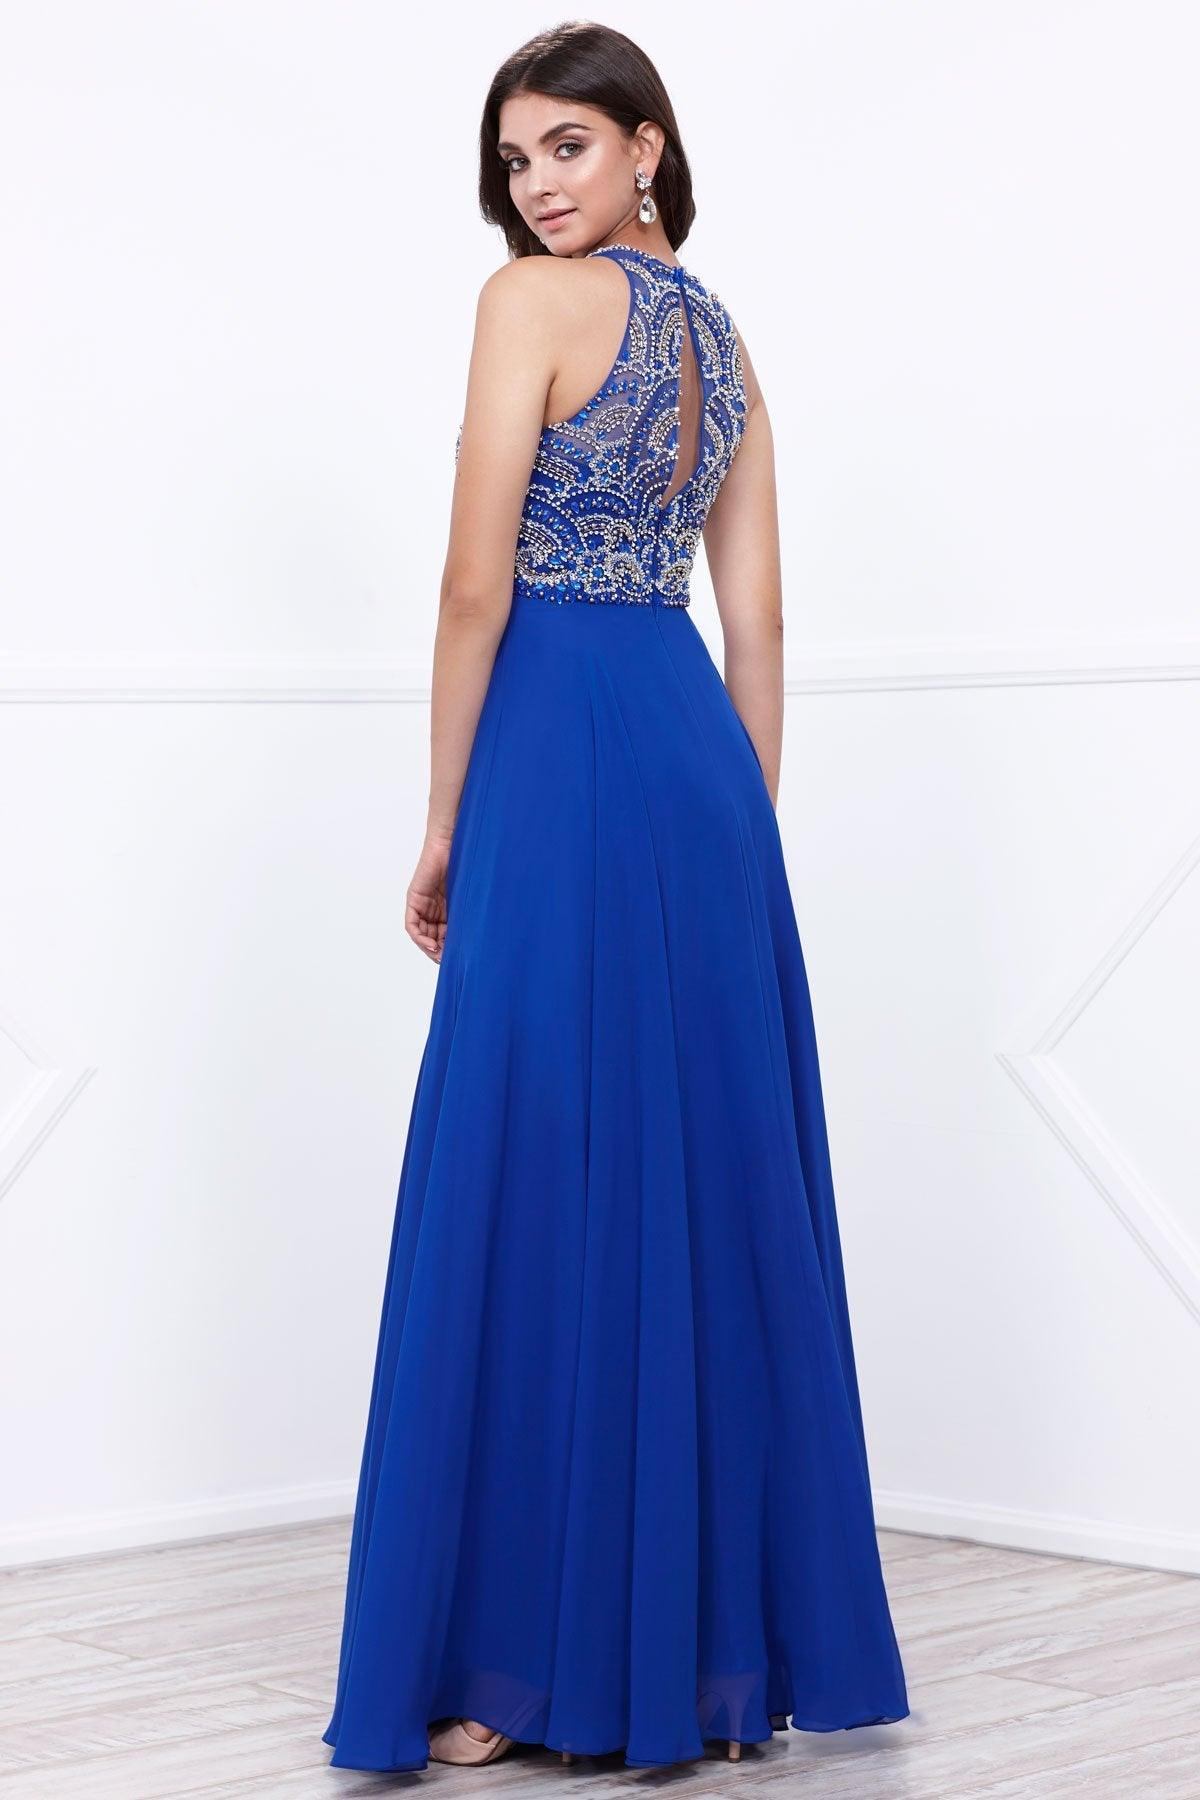 Aqua Long Formal Dress Prom for $194.99 – The Dress Outlet